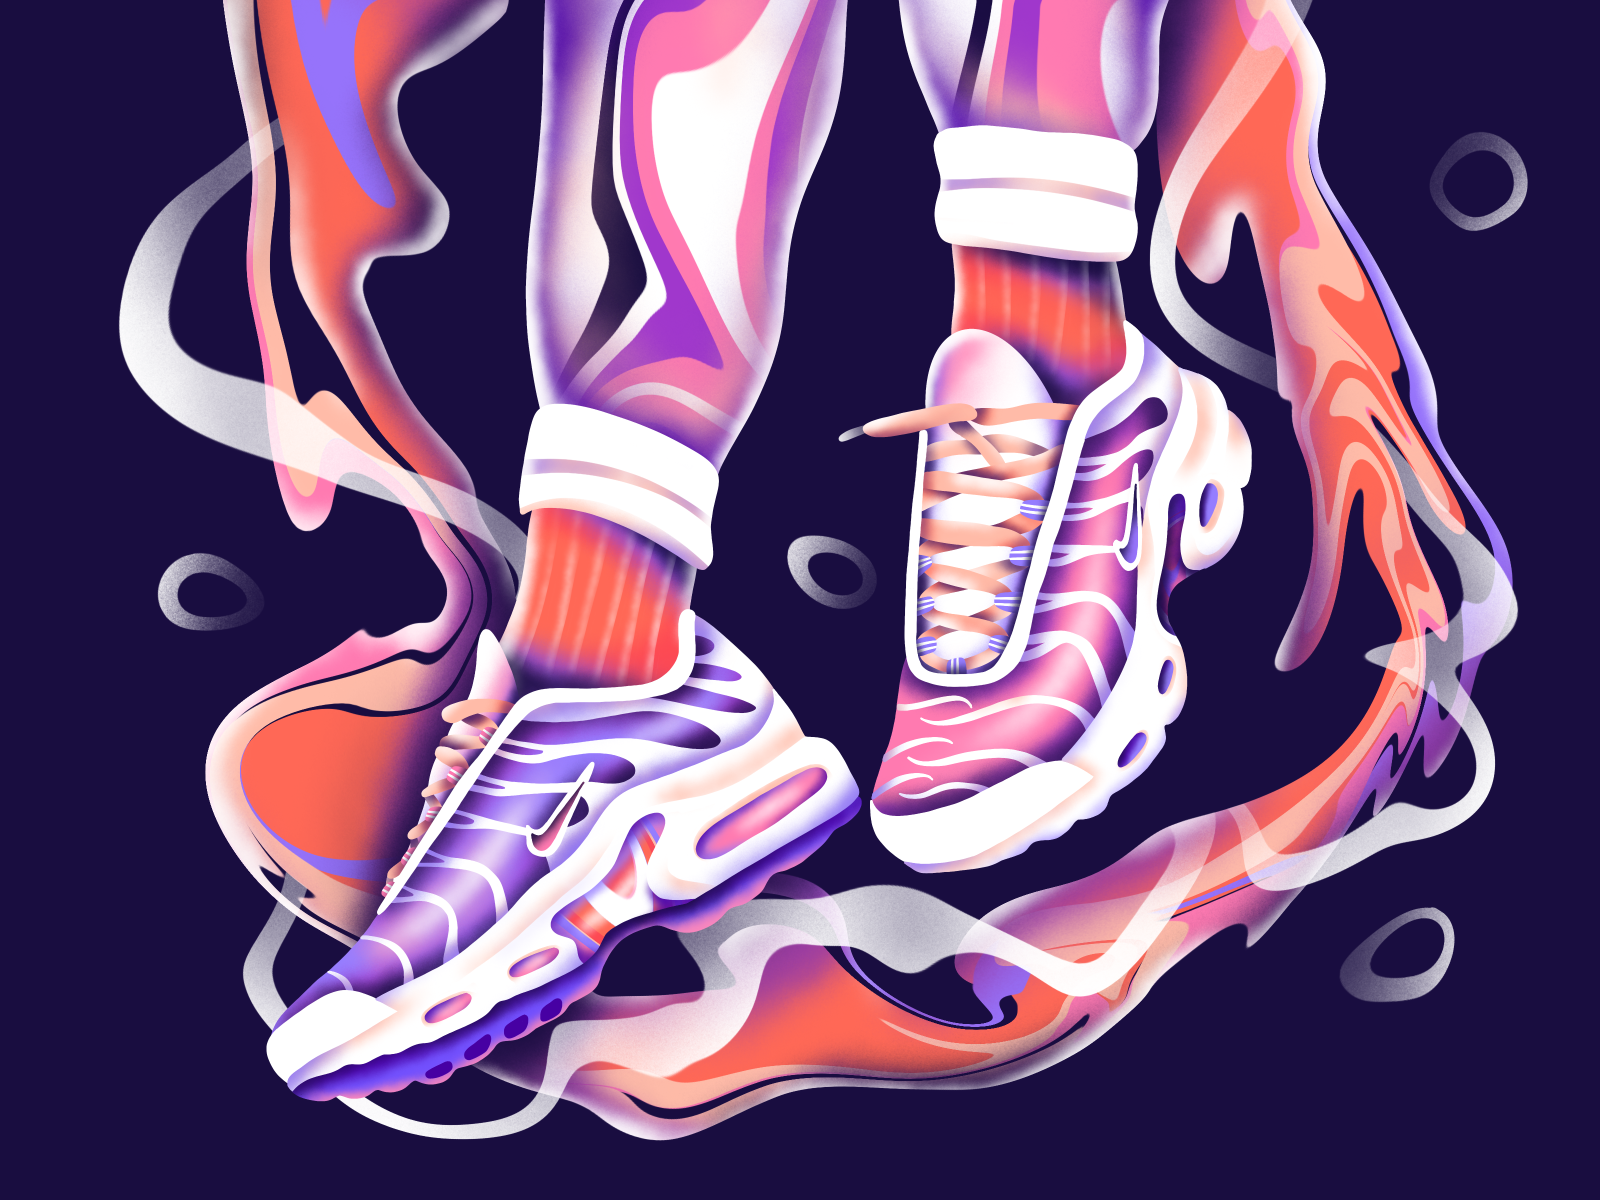 Nike Art designs, themes, templates and 